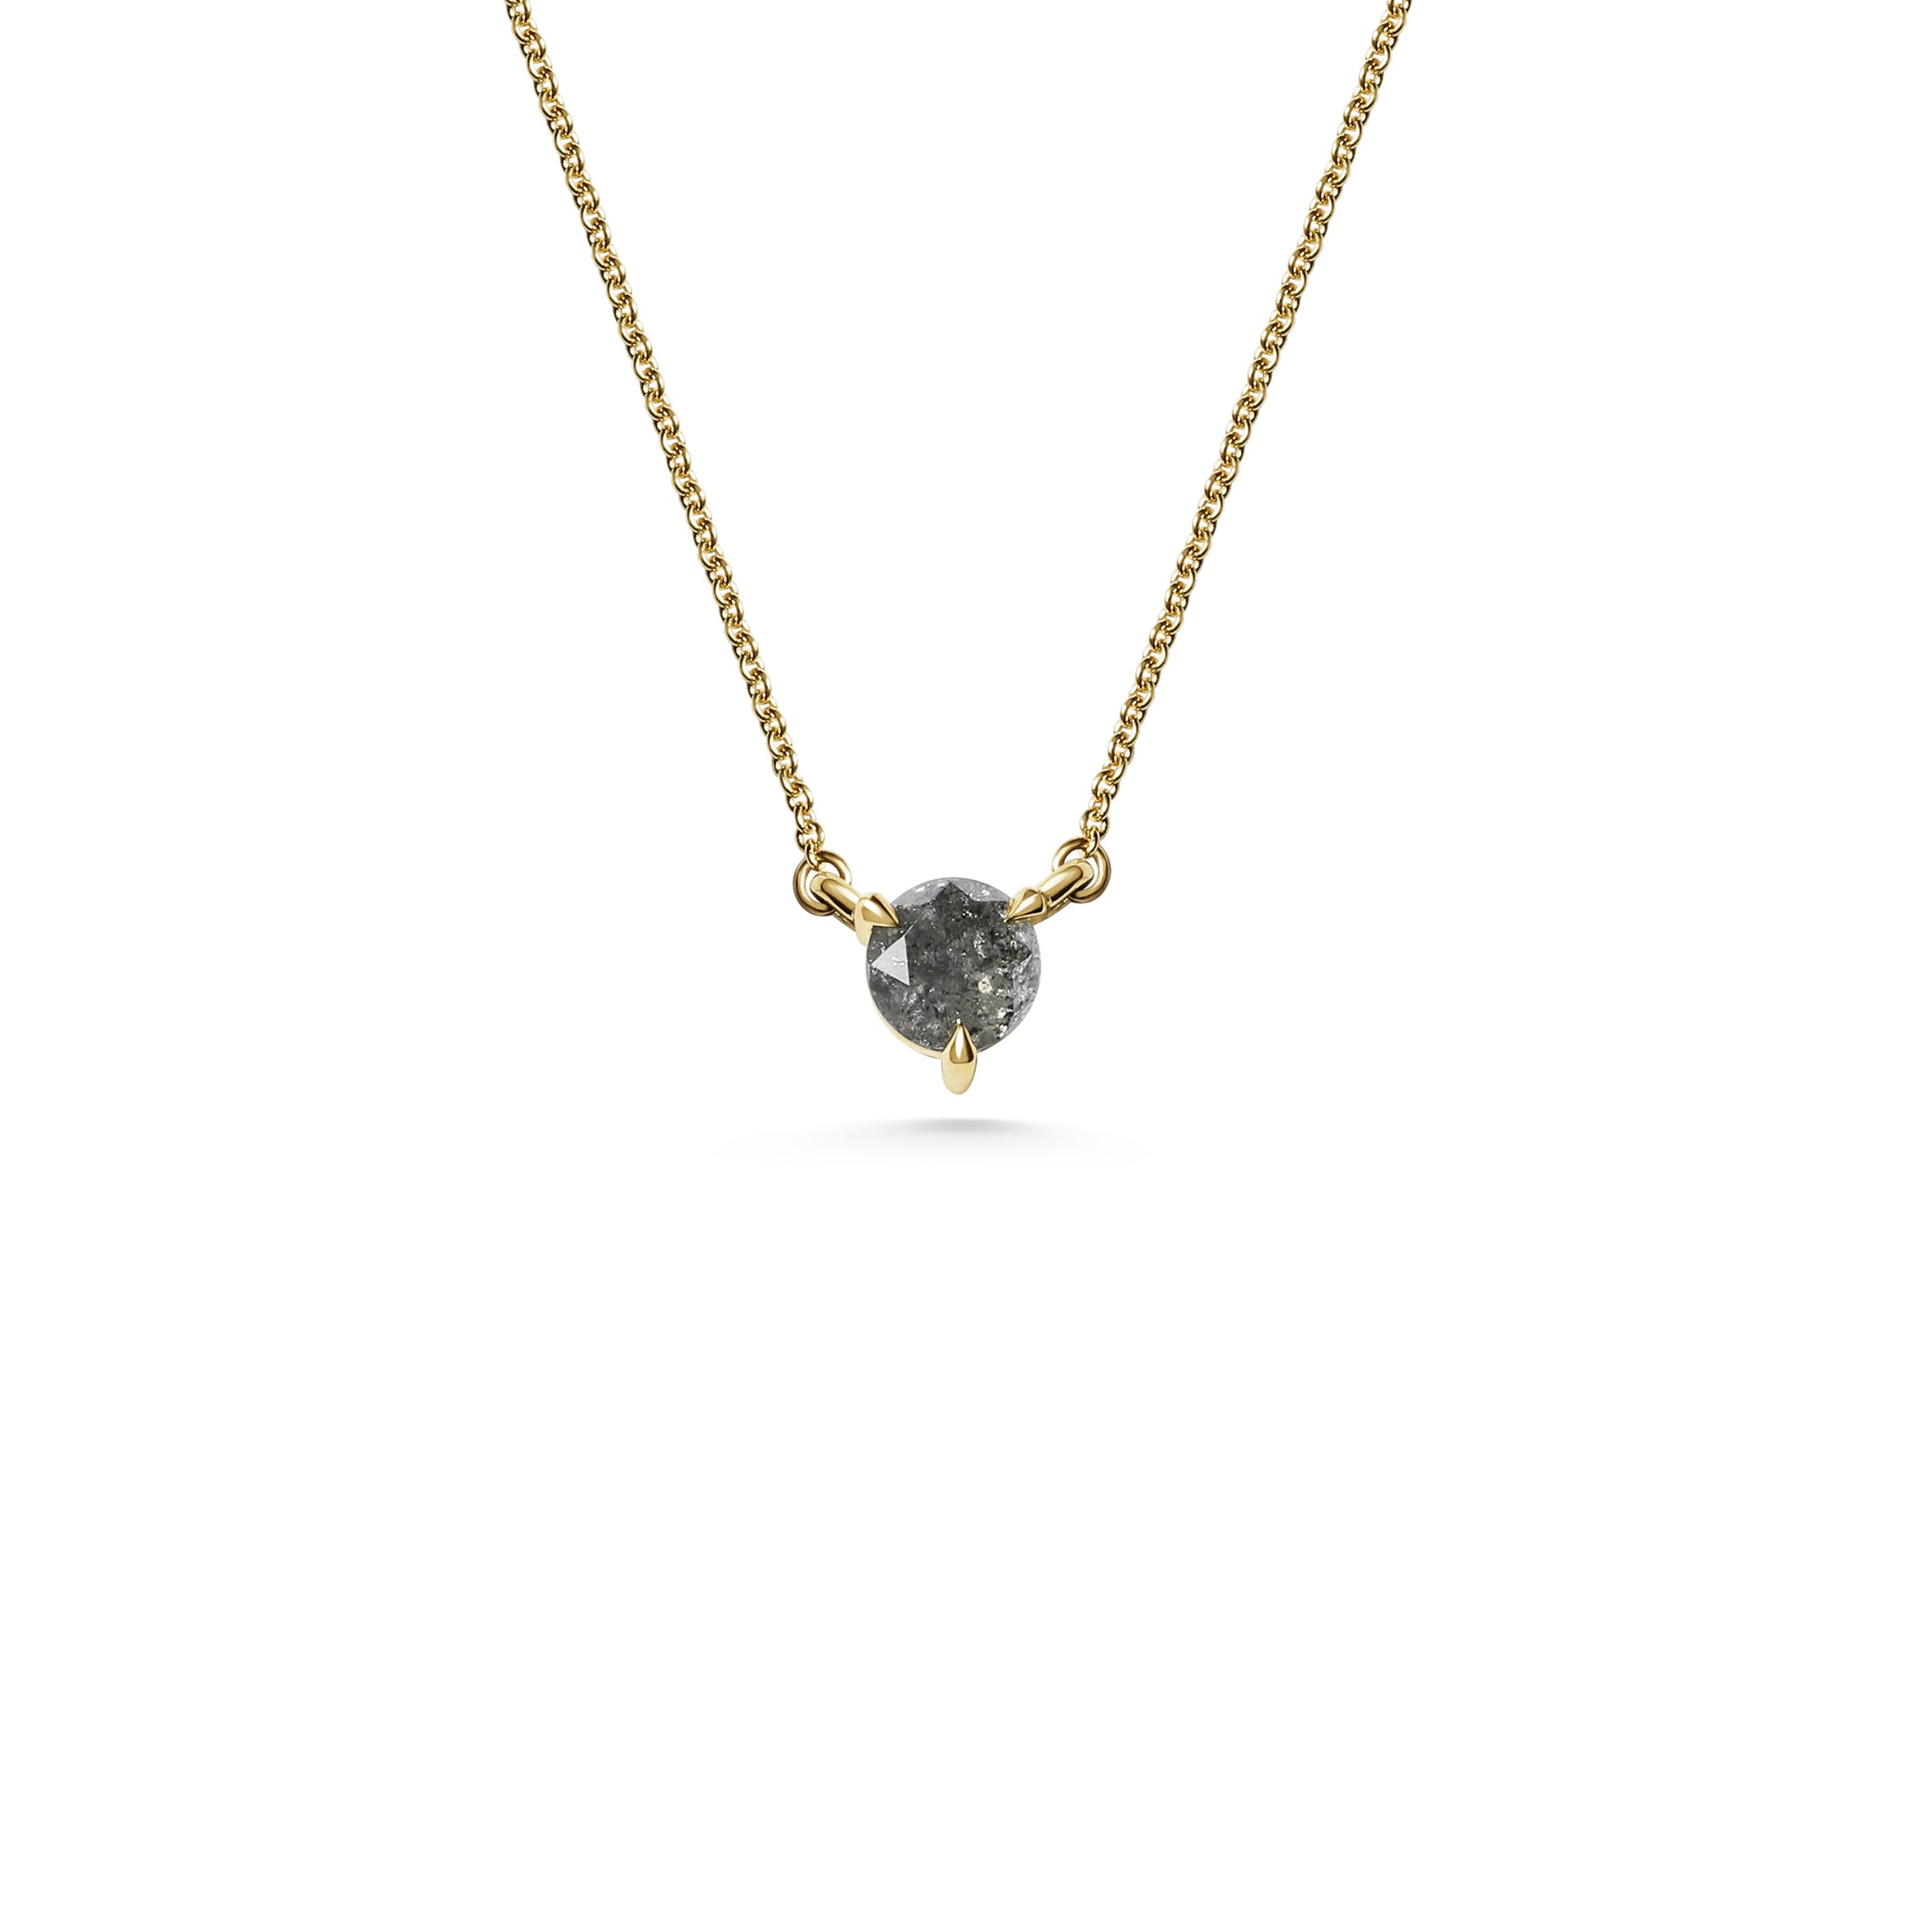 The 5mm Salt and Pepper Grey Diamond Necklace - 0.57ct by East London jeweller Rachel Boston | Discover our collections of unique and timeless engagement rings, wedding rings, and modern fine jewellery.